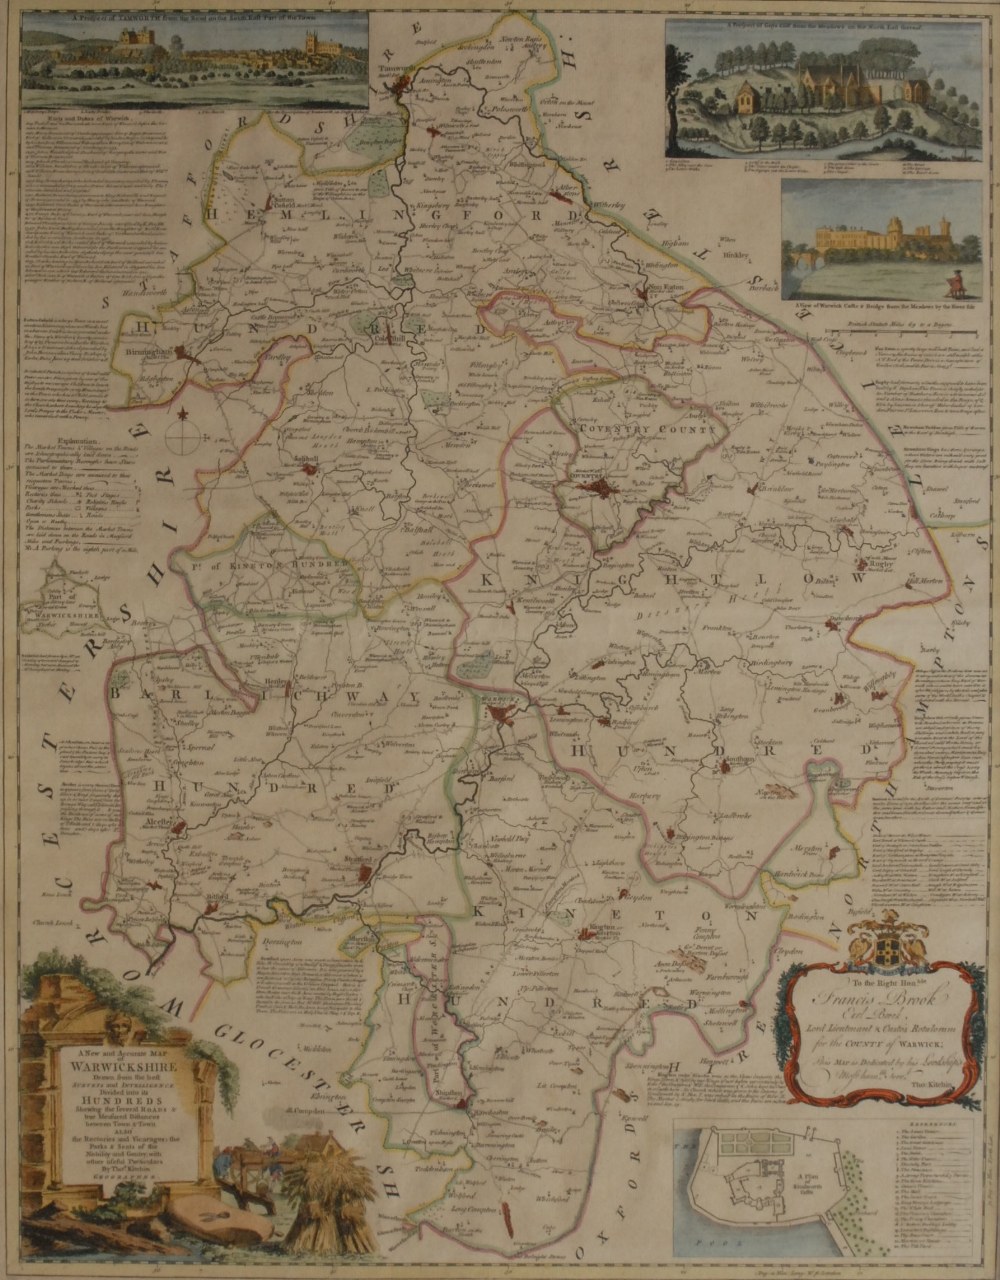 Thomas Kitchen, A New and Accurate Map of Warwickshire, drawn from the best Surveys and Intelligence